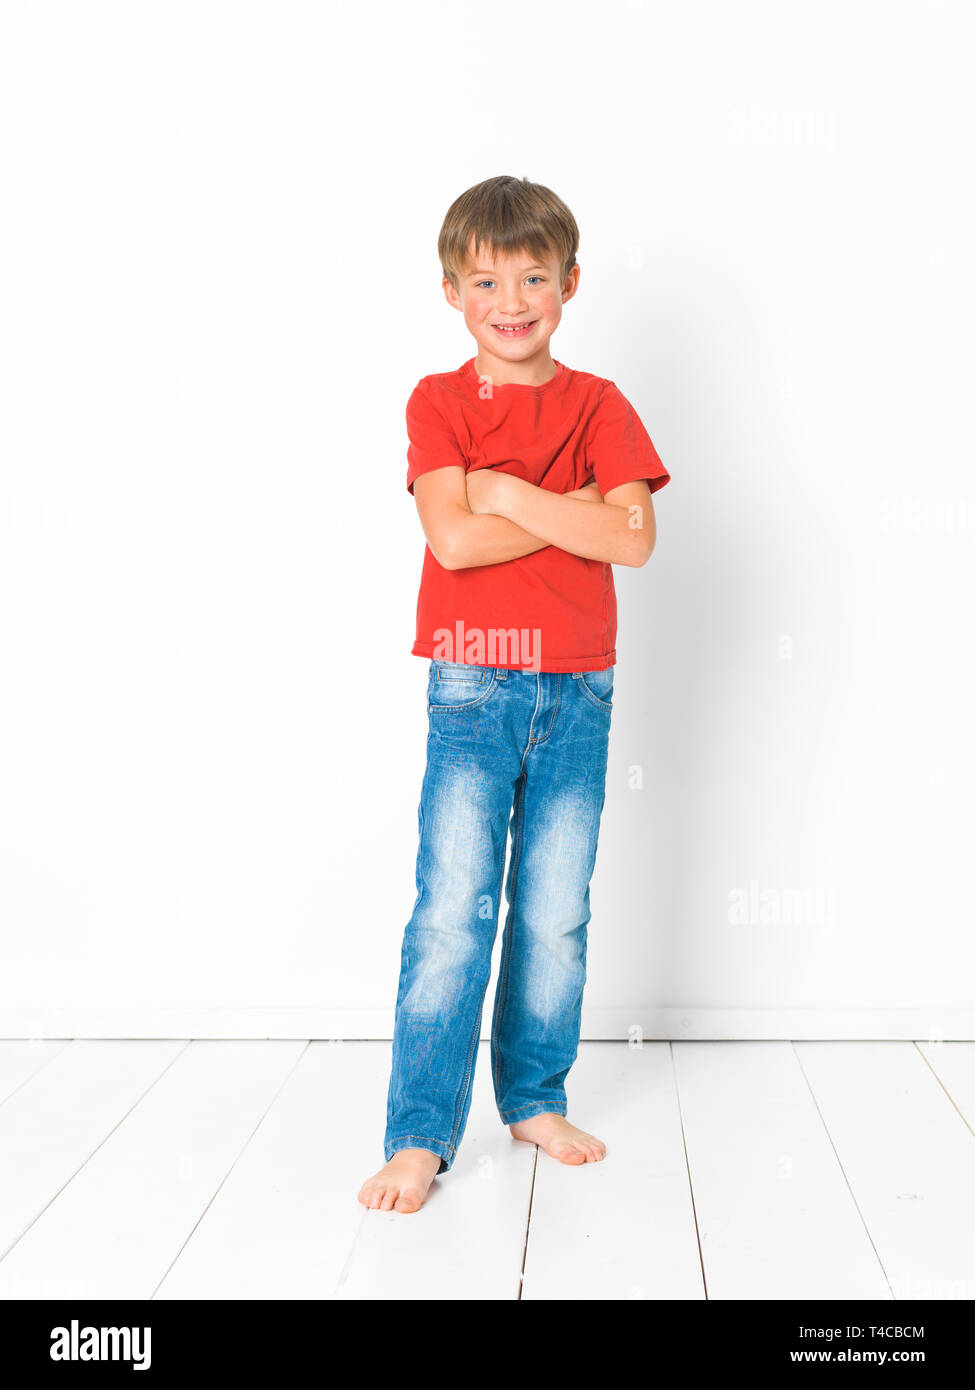 Usikker stykke er nok cute and blond boy with red shirt and blue jeans is posing on white wooden  floor in front of white background Stock Photo - Alamy